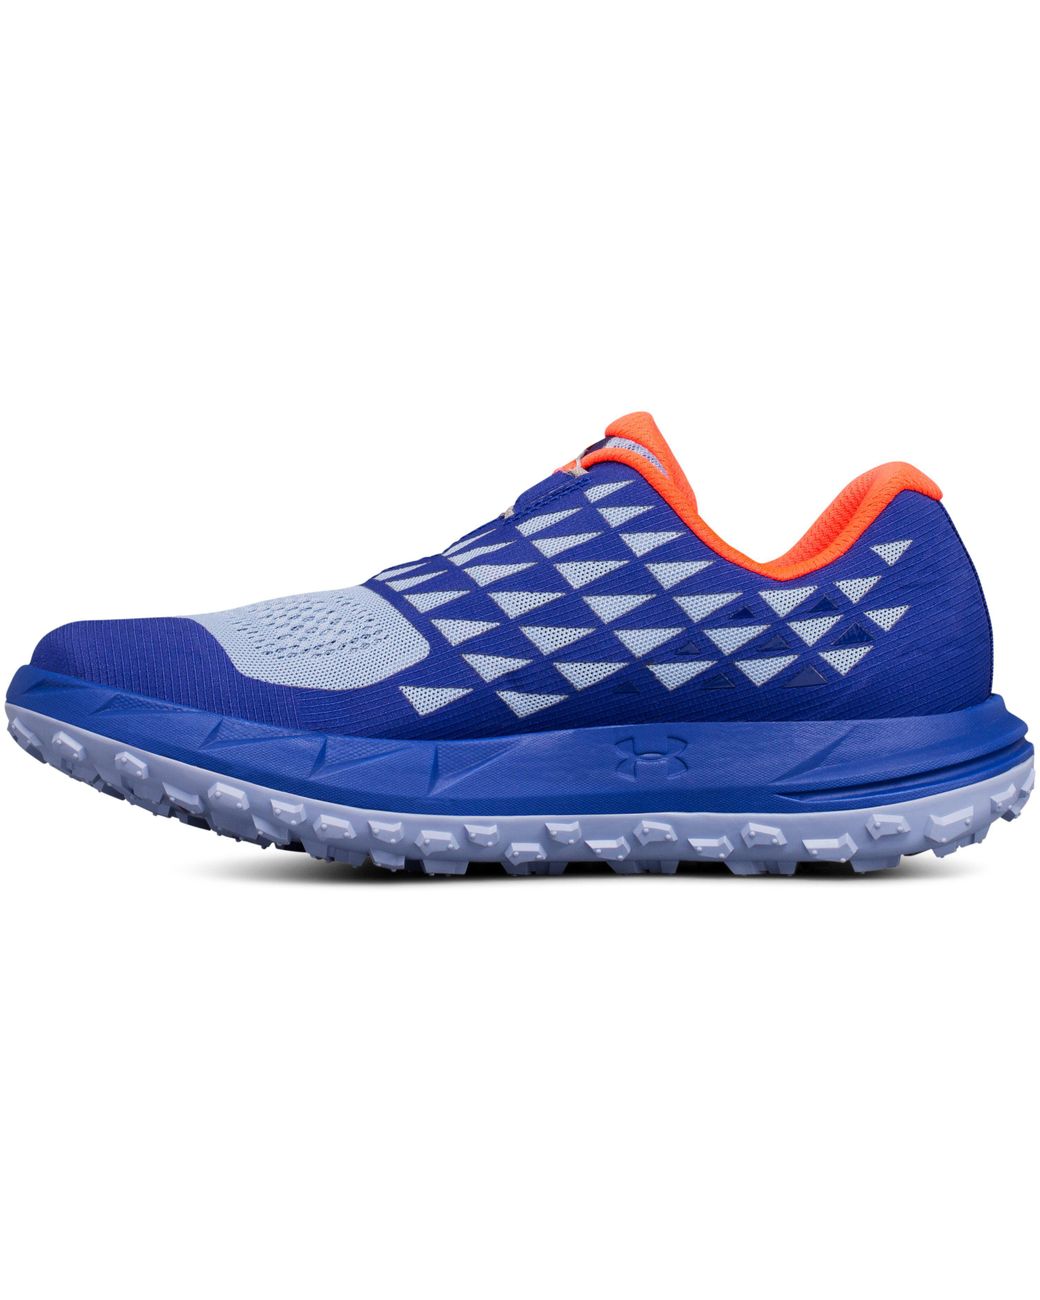 Charlotte Bronte Revelar Desempleados Under Armour Women's Ua Fat Tire 3 Running Shoes in Blue | Lyst